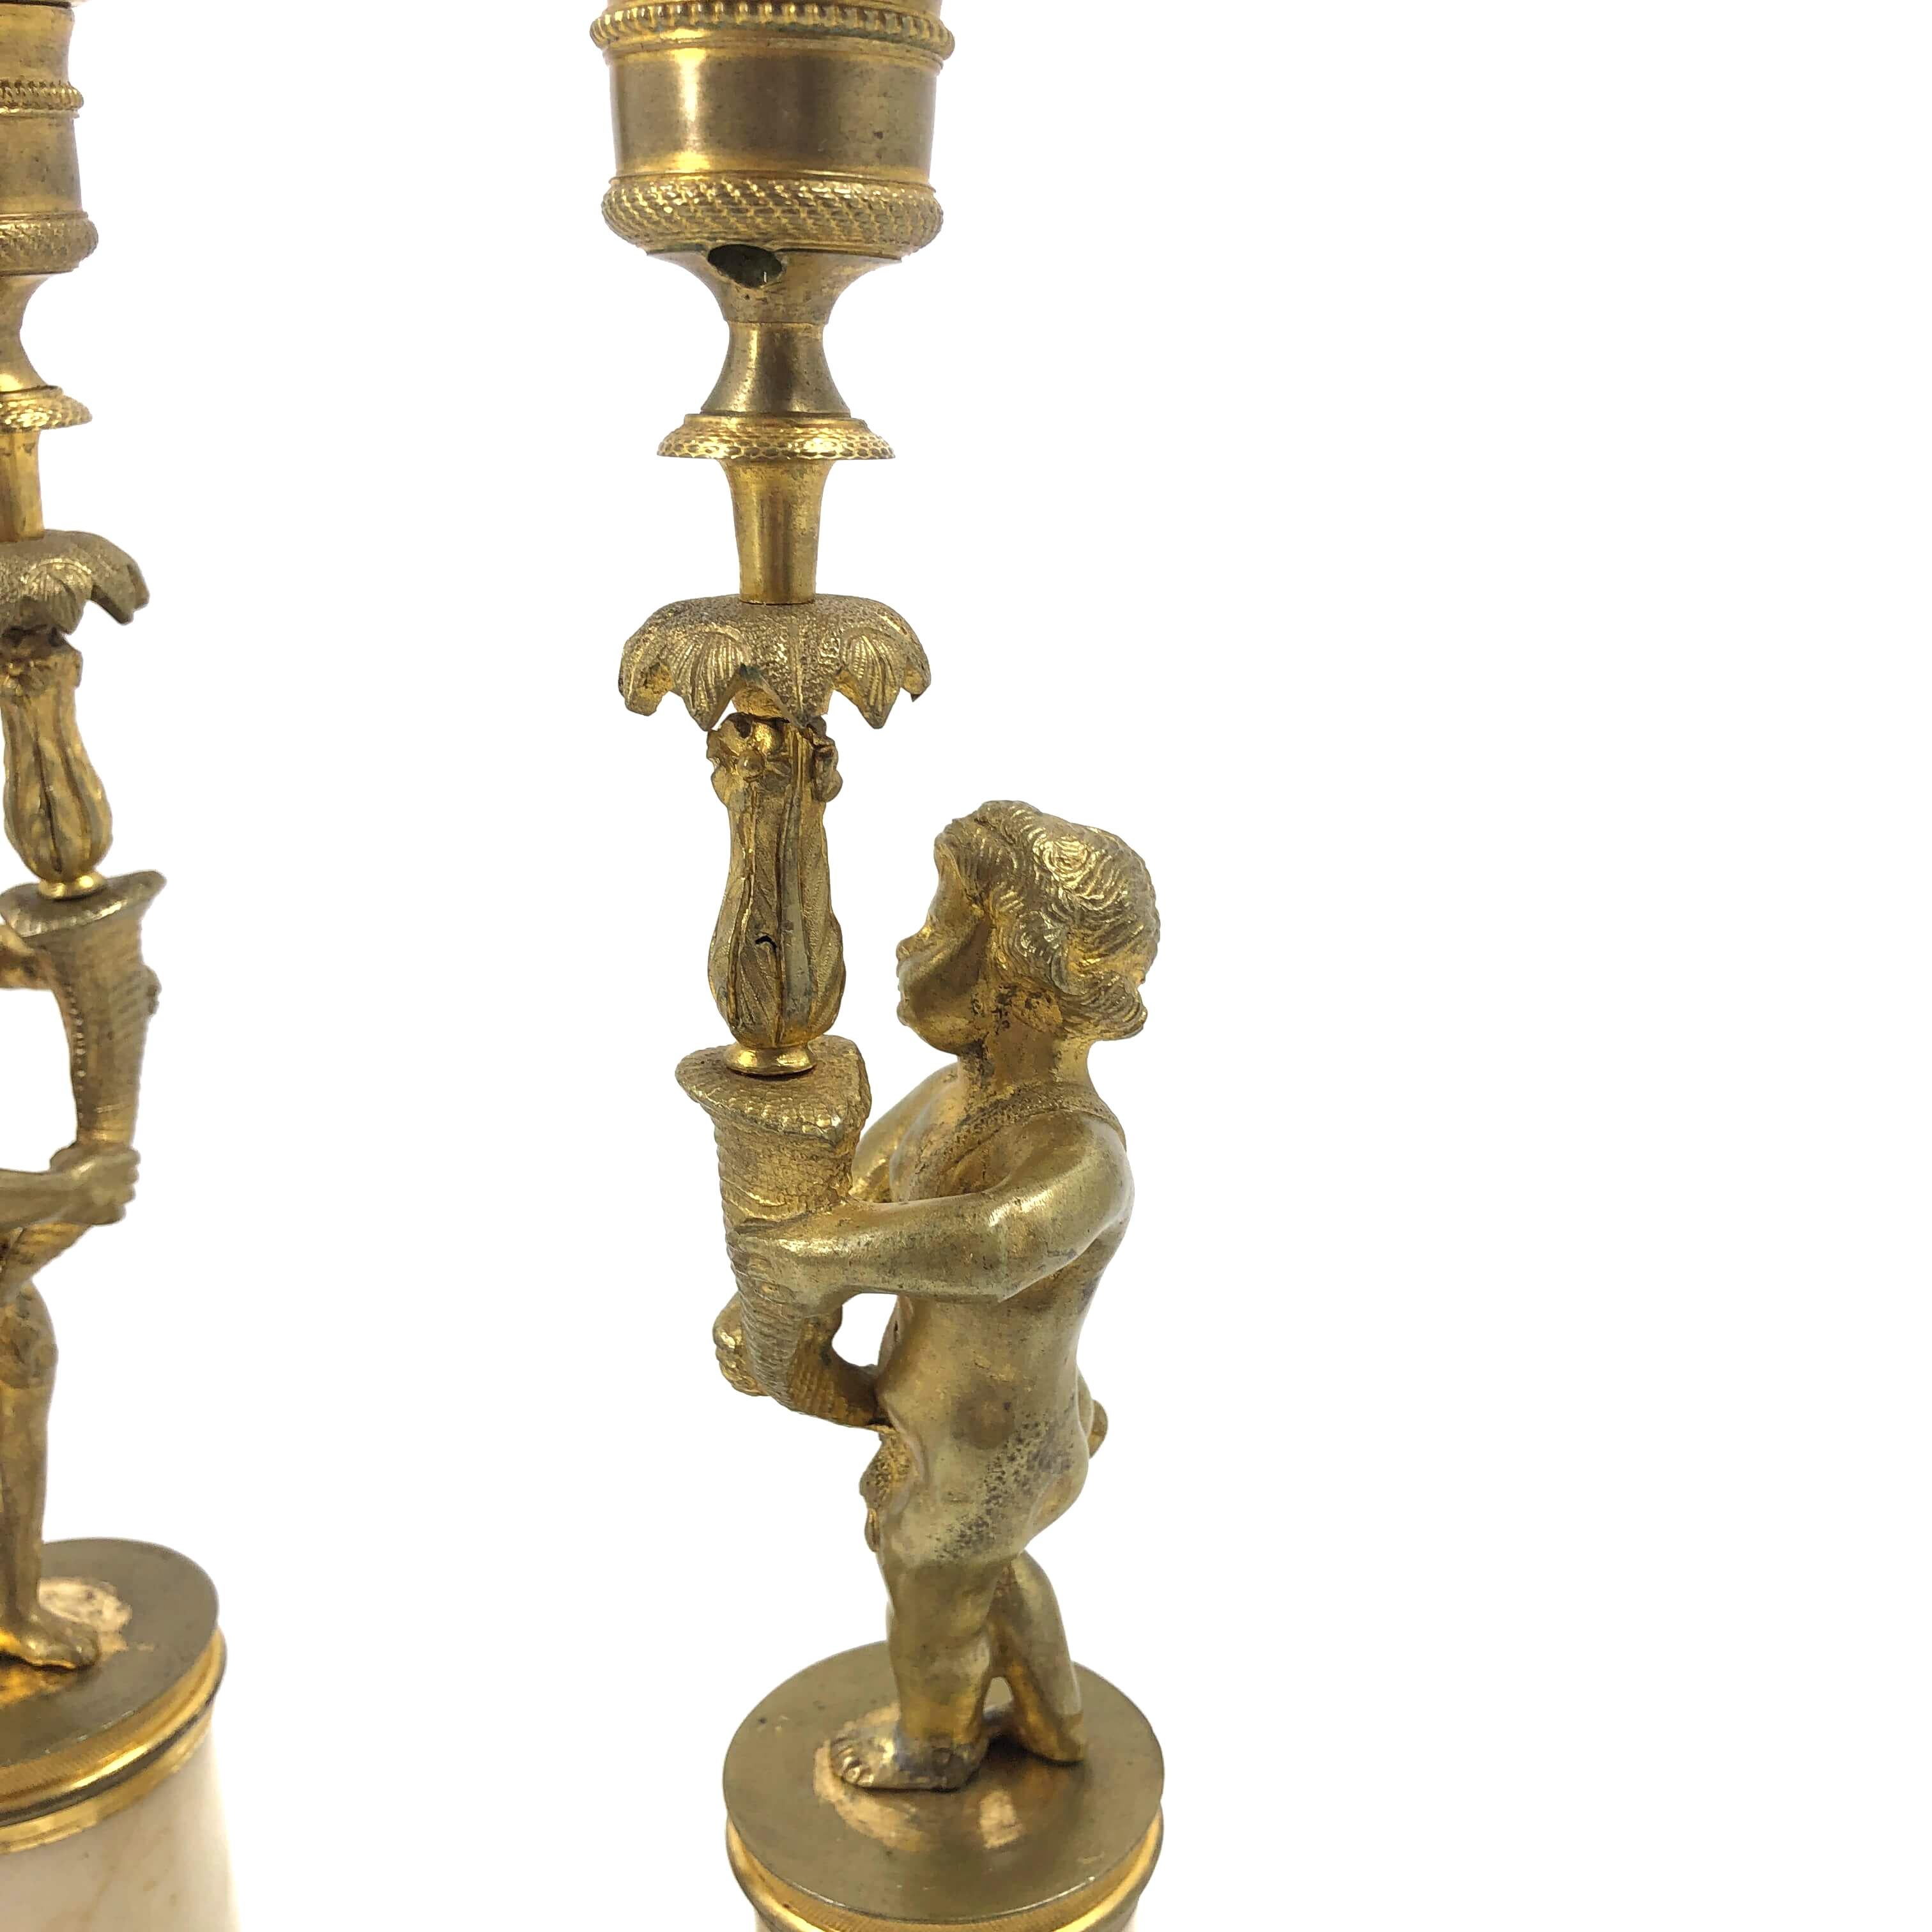 A pair of French Louis XVI figural putti gilt bronze candlesticks. Putti holding cornucopia arms with palm leaves and chased rims, above a neoclassical round marble pedestal with chased bronze capitals and palm leaves, above a square plinth base.